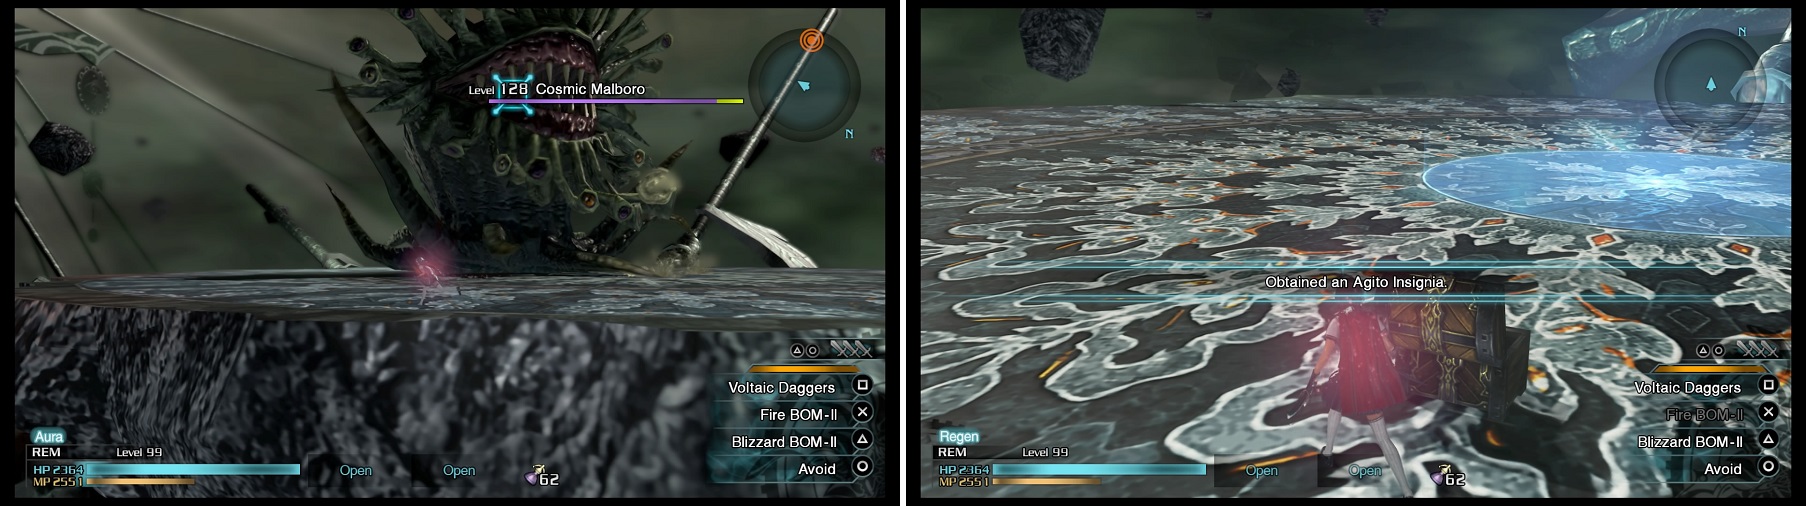 The Cosmic Malboro is huge and looks more threatening than it is (left). Slay it to receive the Agito Insignia, the best accessory in the game (right).